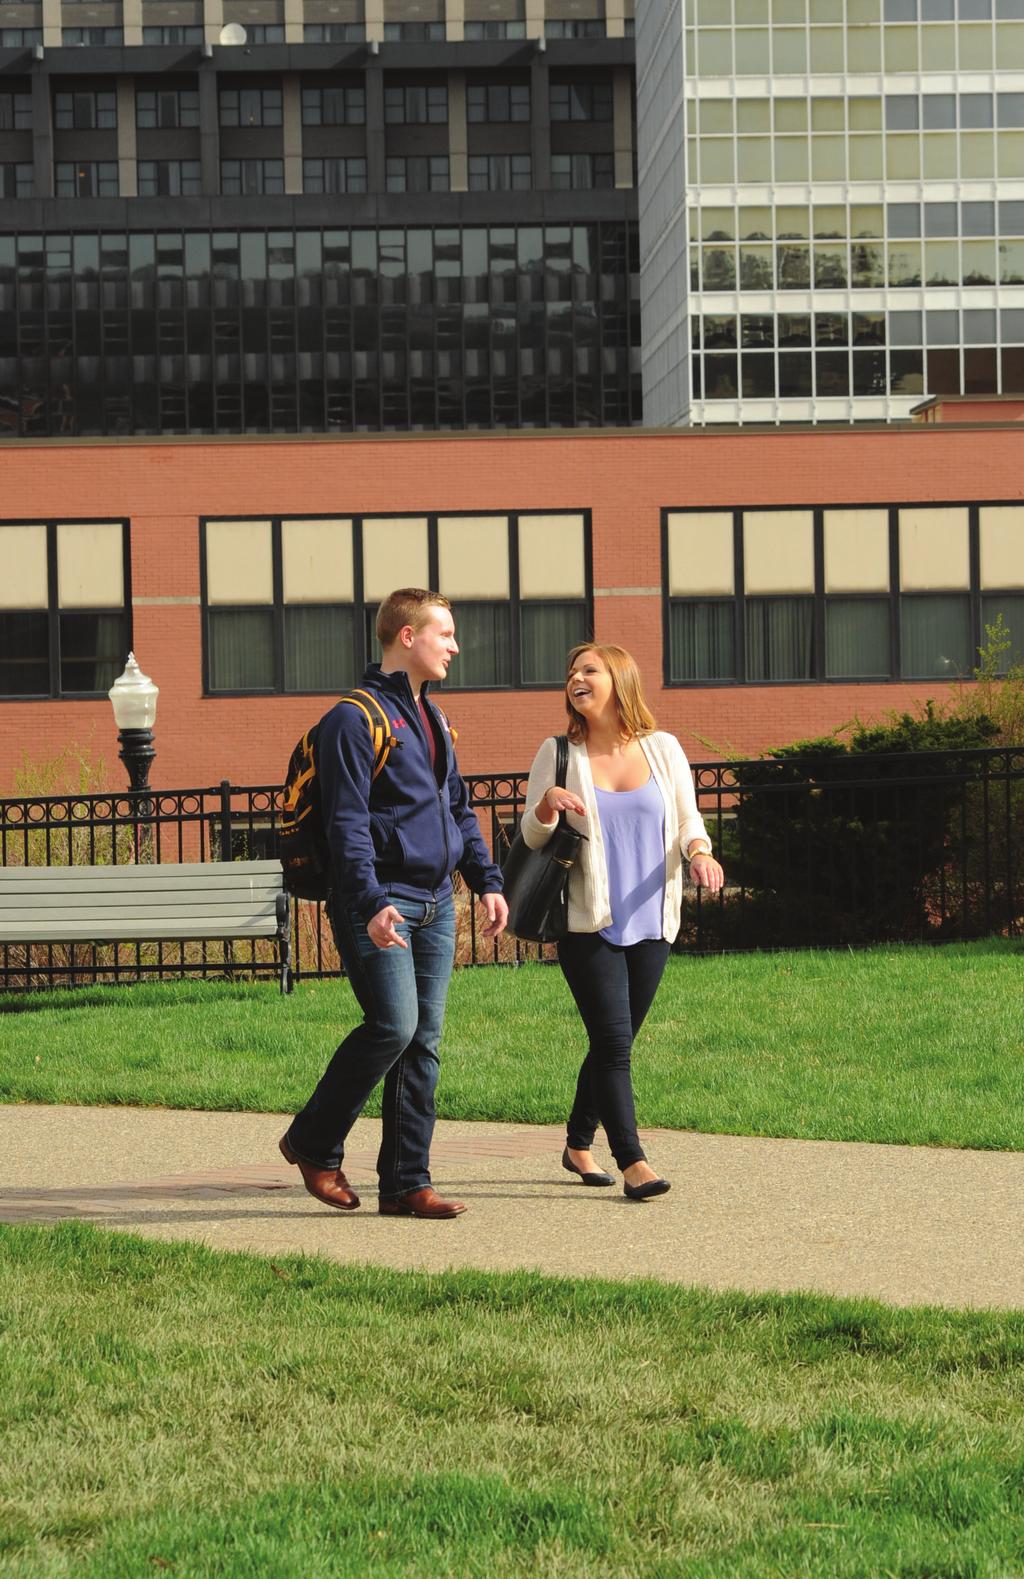 A Duquesne education is within your reach. If you decide that Duquesne is where you belong, we will do everything possible to create a workable plan for financing your education.